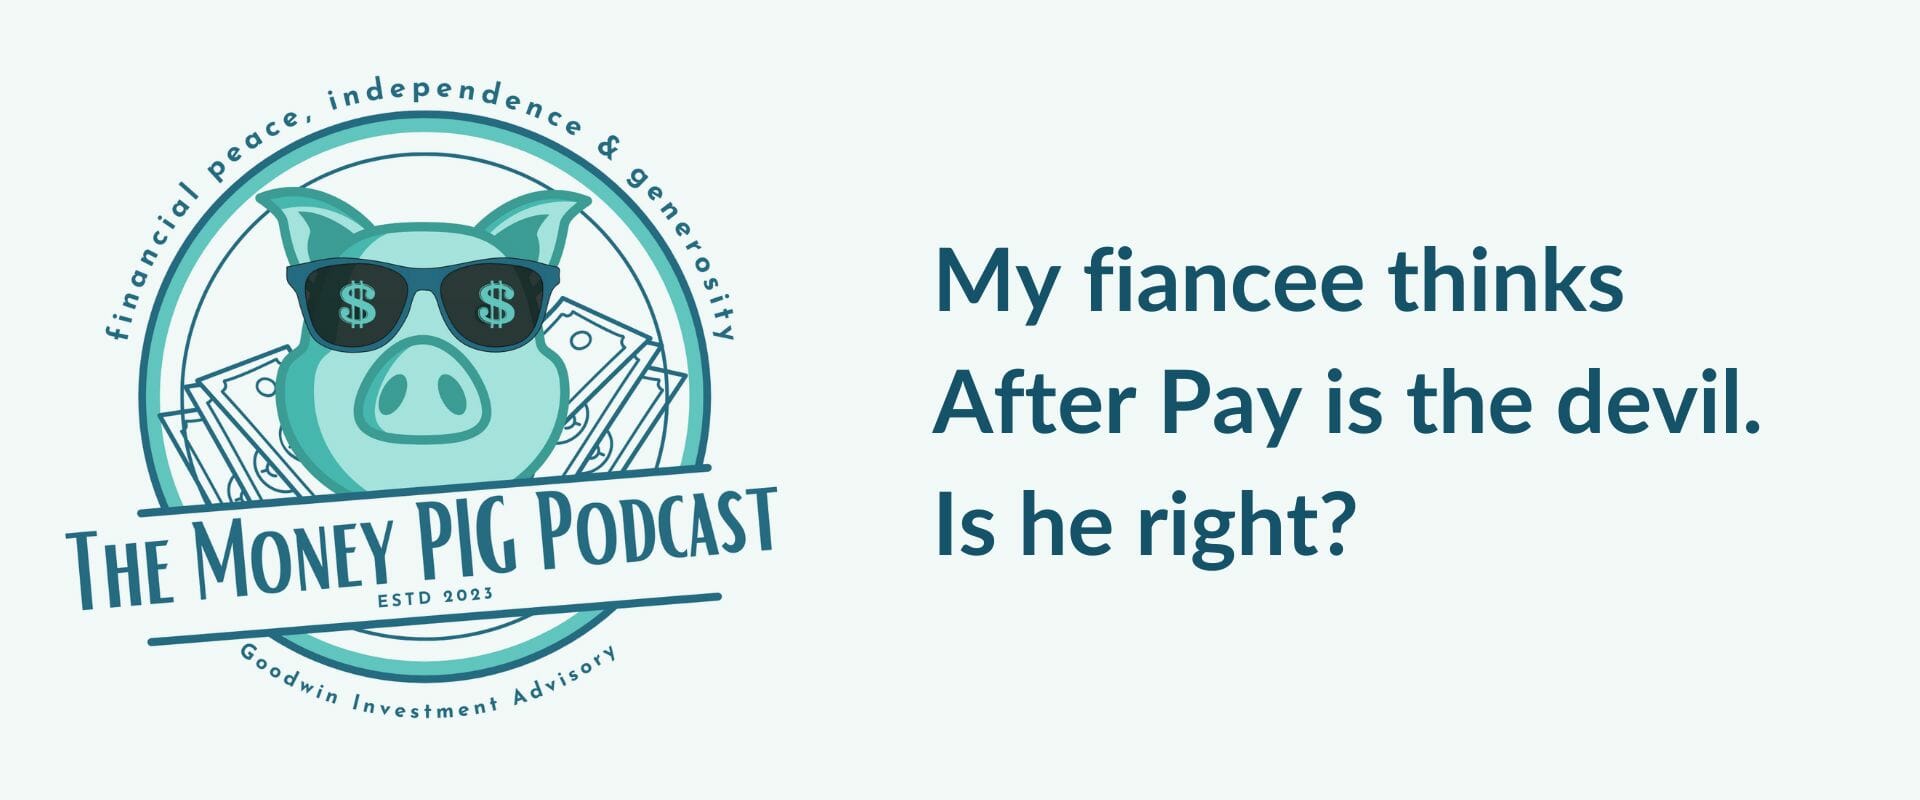 My fiance thinks After Pay is the devil. Is he right?